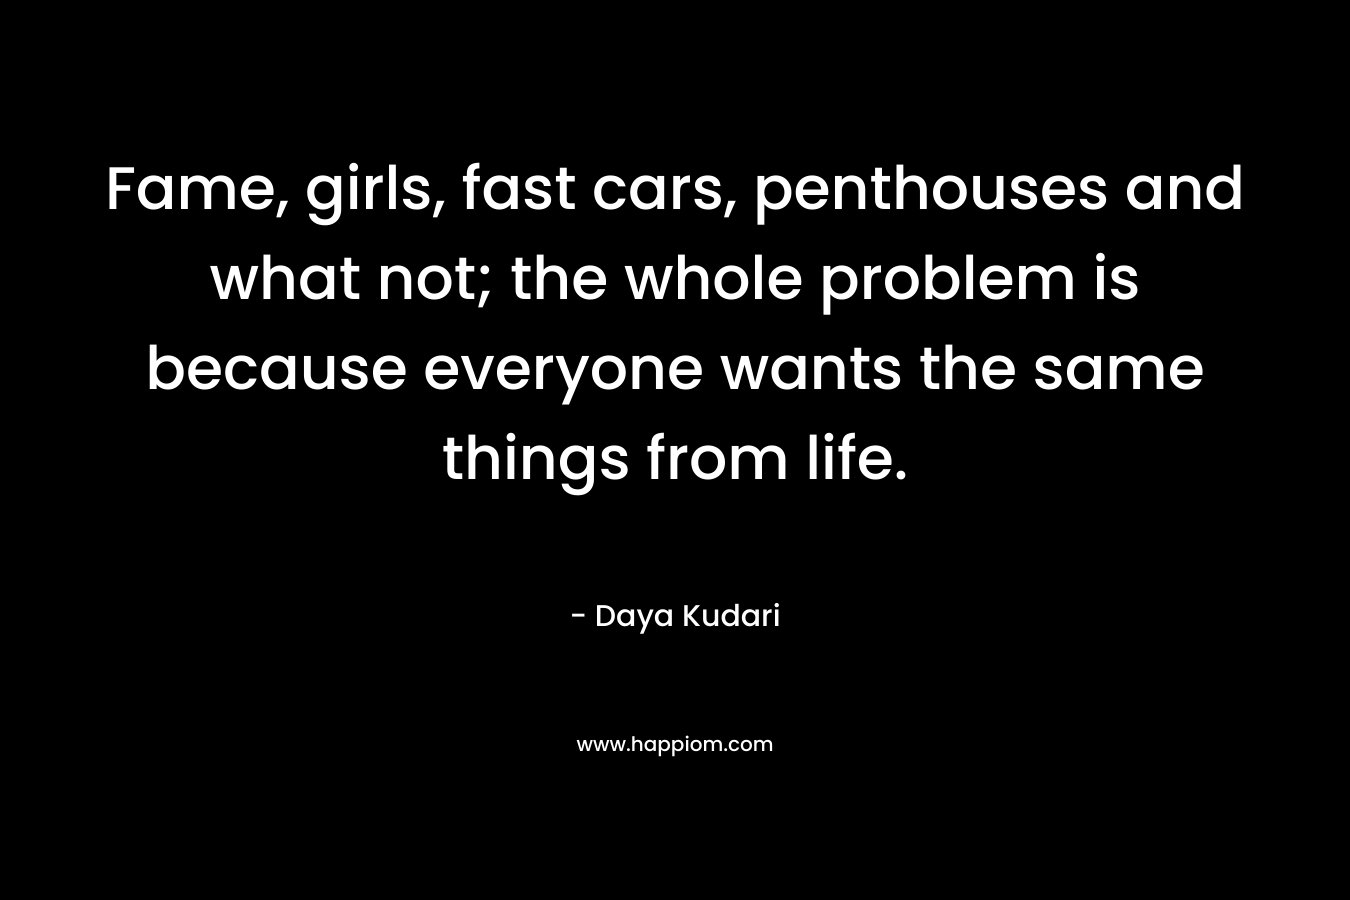 Fame, girls, fast cars, penthouses and what not; the whole problem is because everyone wants the same things from life. – Daya Kudari